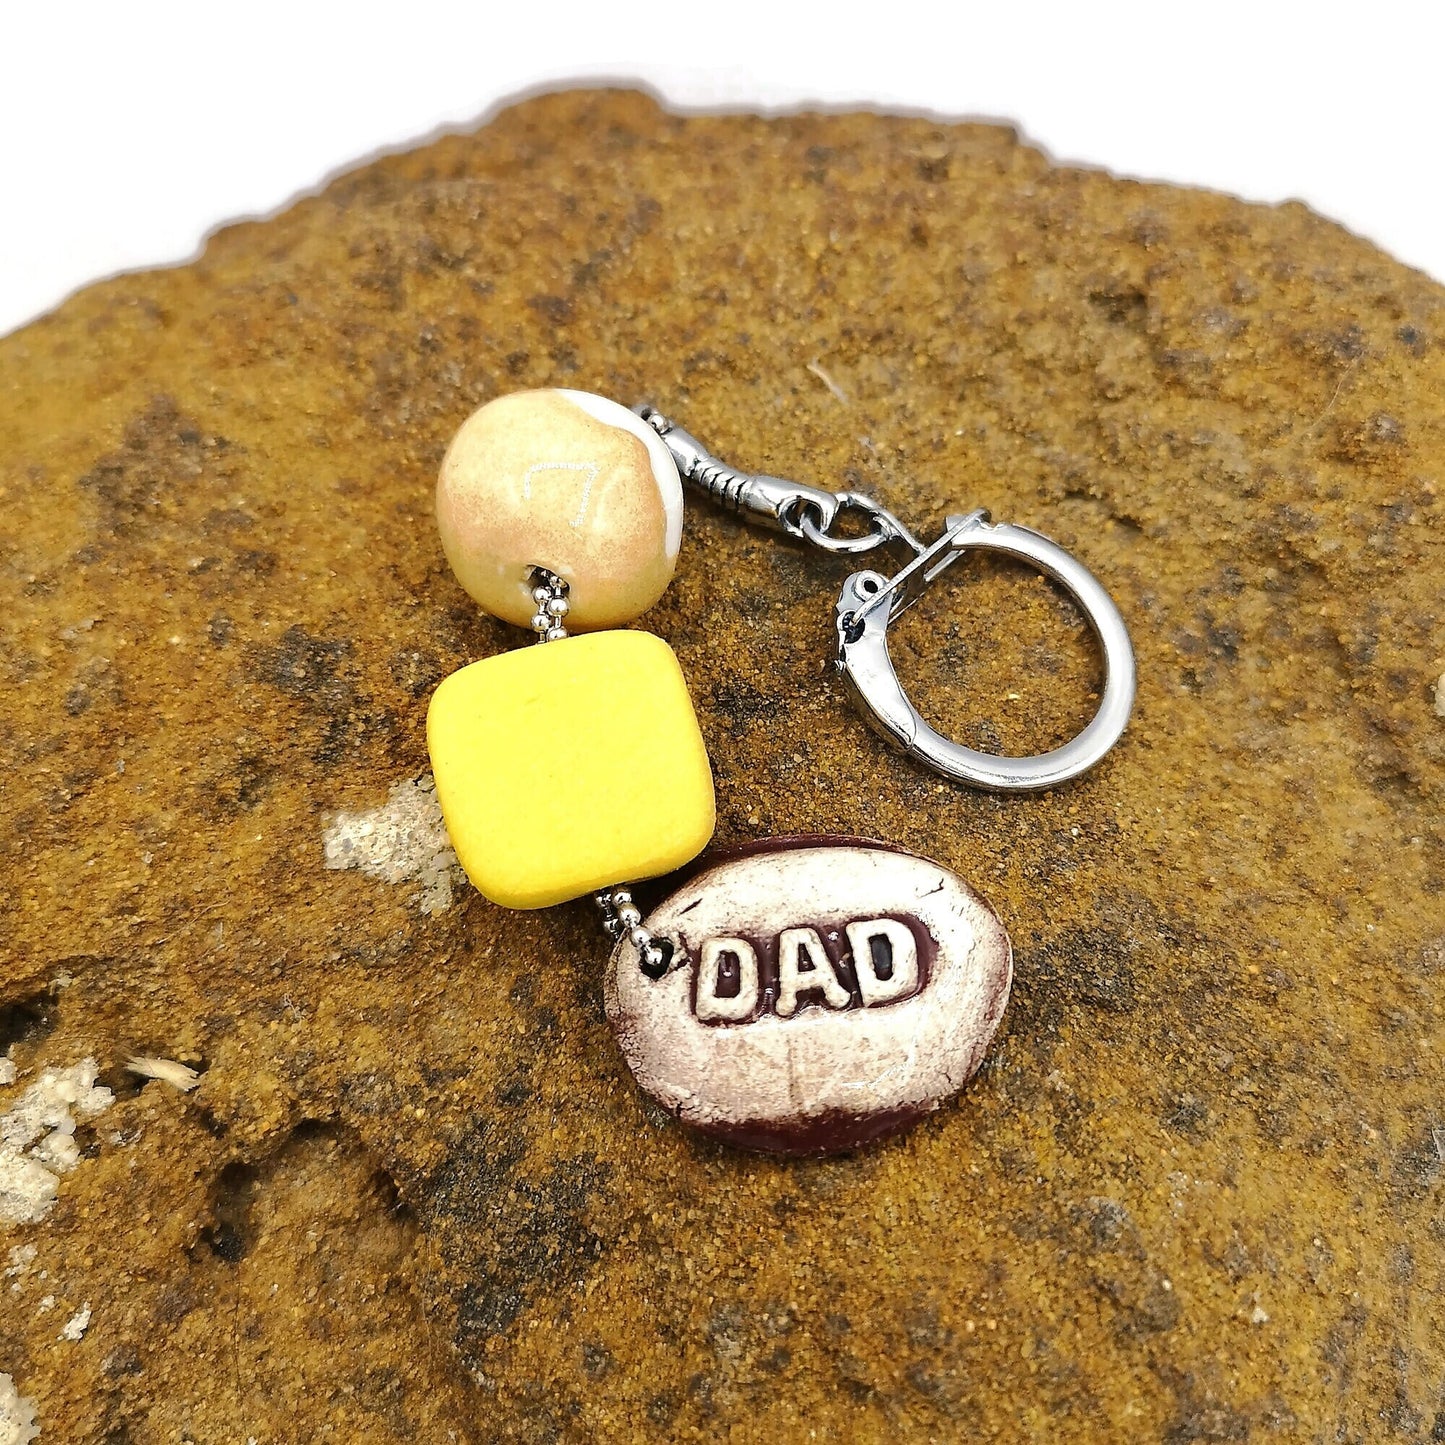 Beaded Keychain, Dad Birthday Gift, Cool Keychain For Men Customizable, Ceramic Clay Charm Keyring Accessories Gift For Daddy - Ceramica Ana Rafael